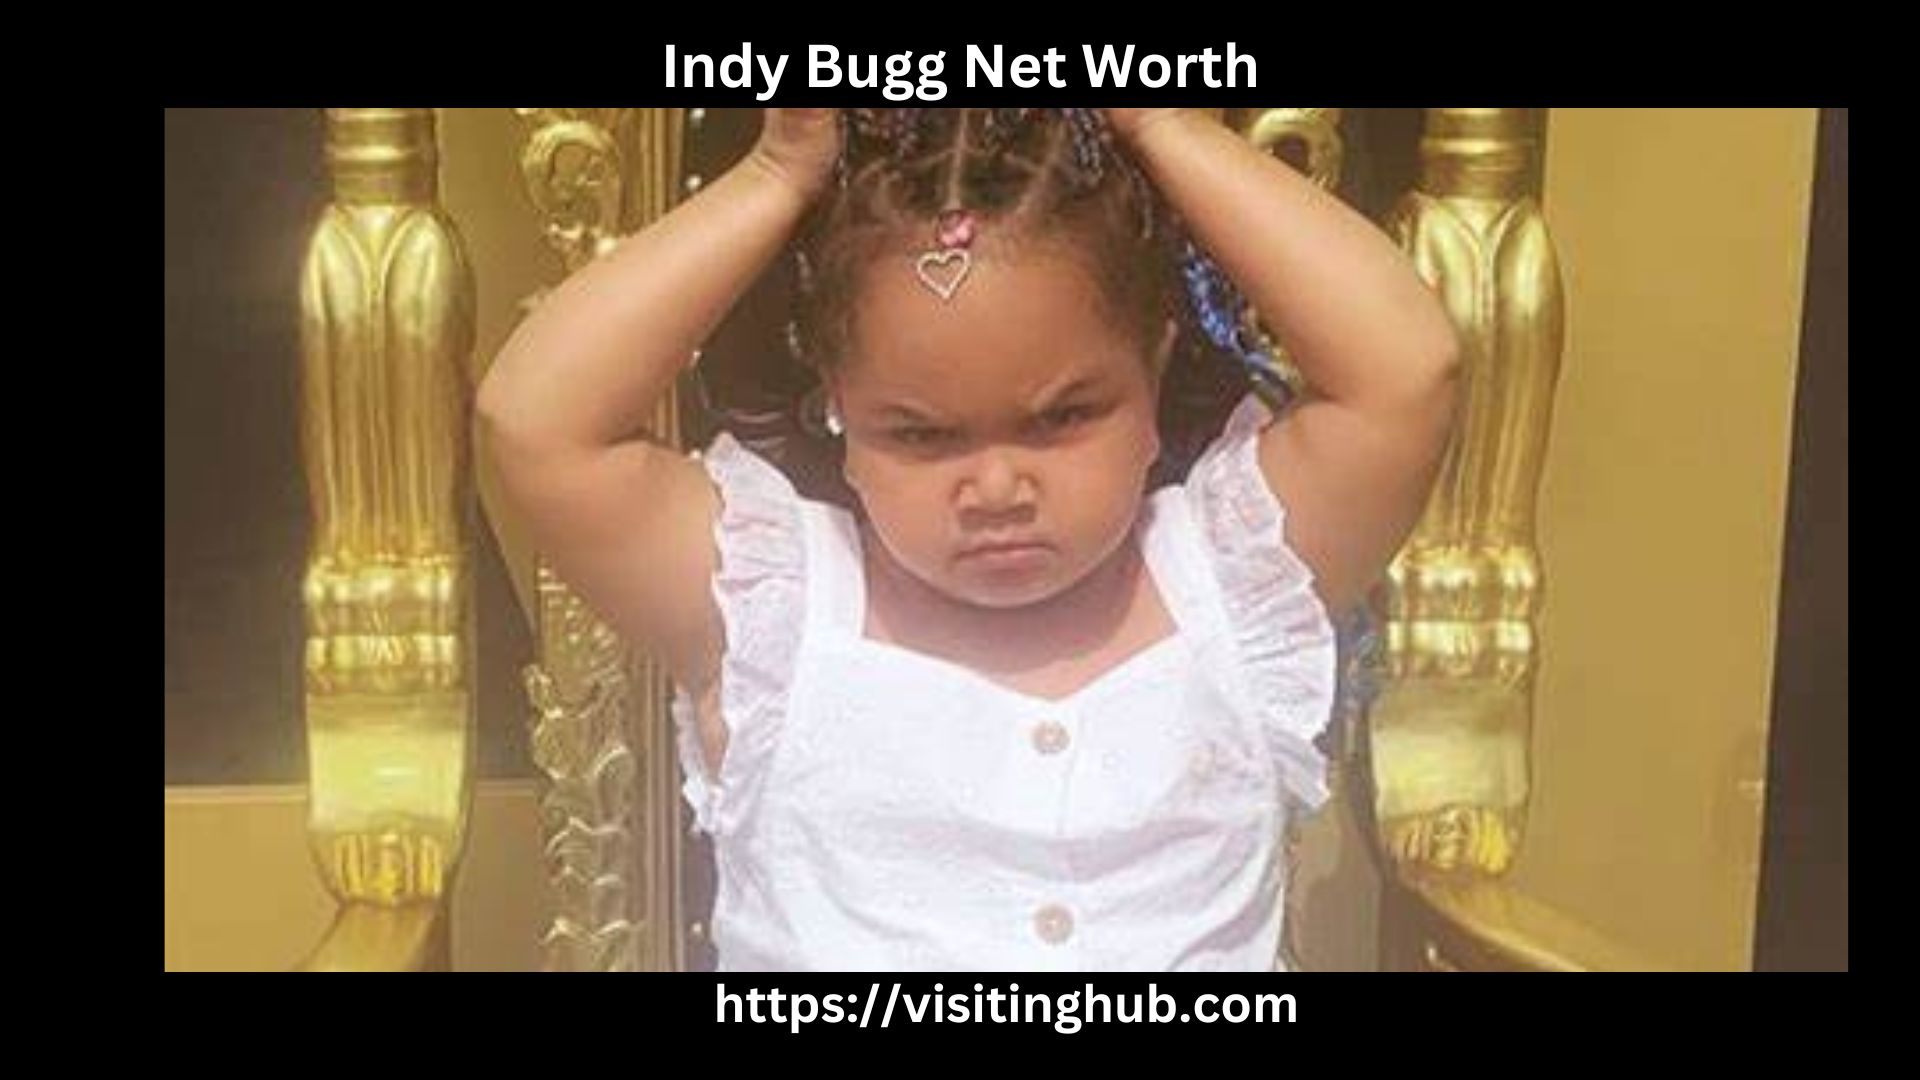 Indy Bugg Net Worth